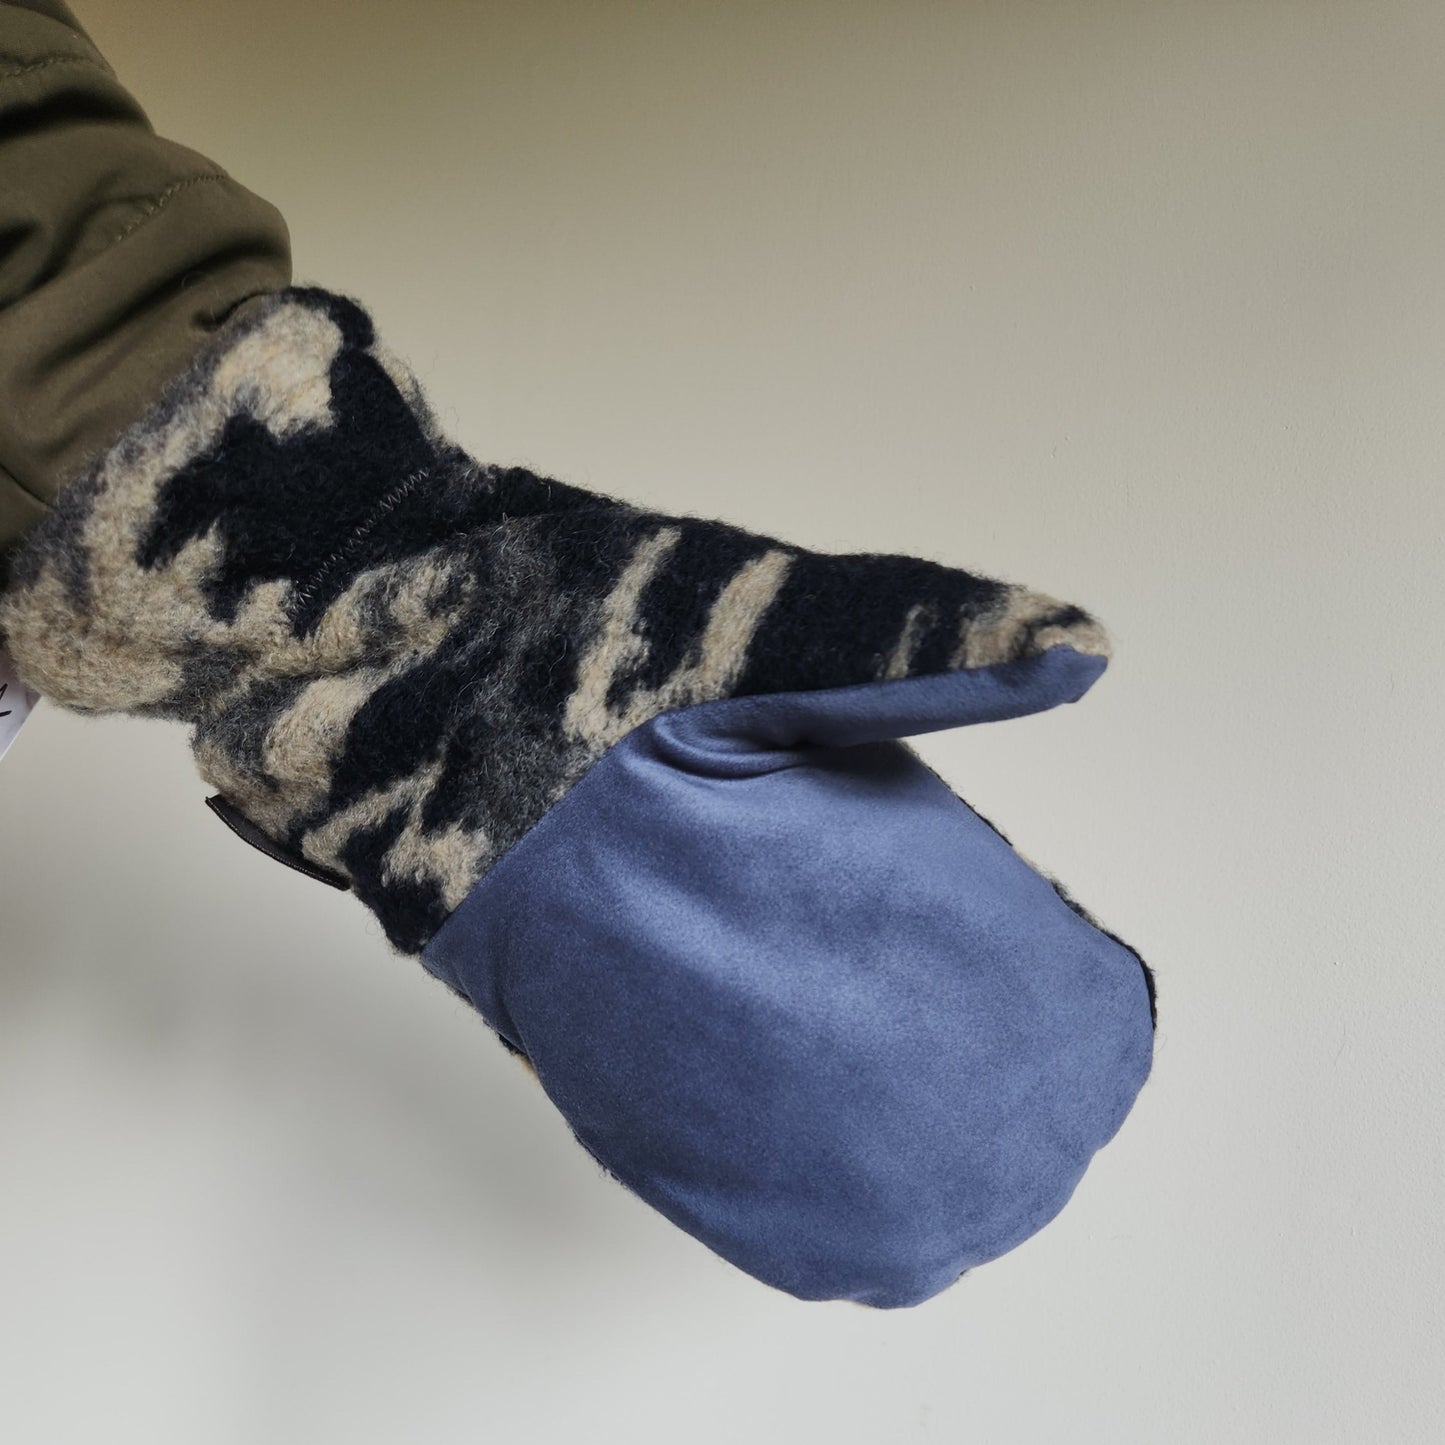 Wool Mittens Navy Abstract Camo